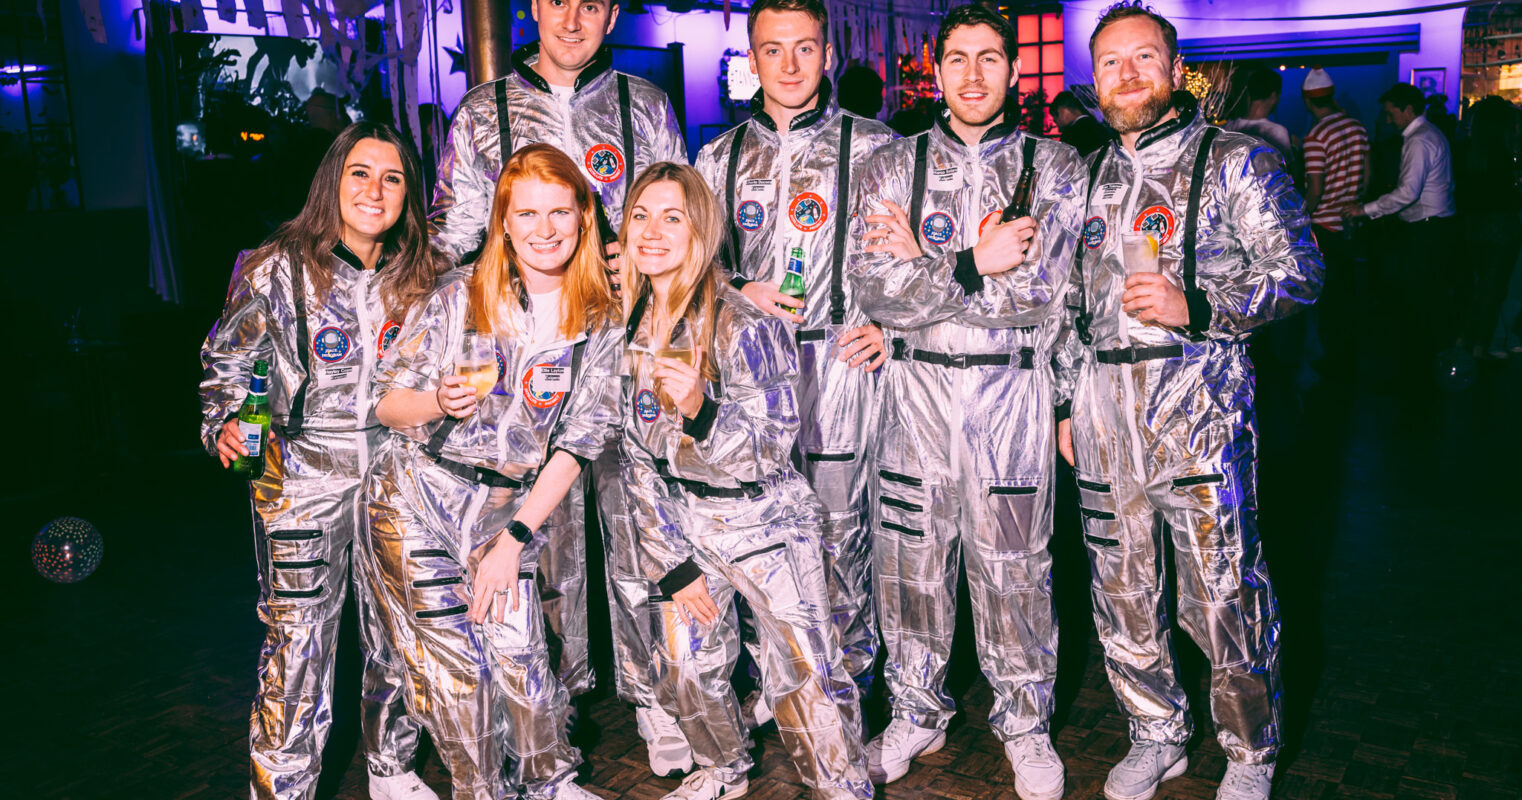 A cheerful group in silver astronaut costumes stands together, holding drinks and smiling.